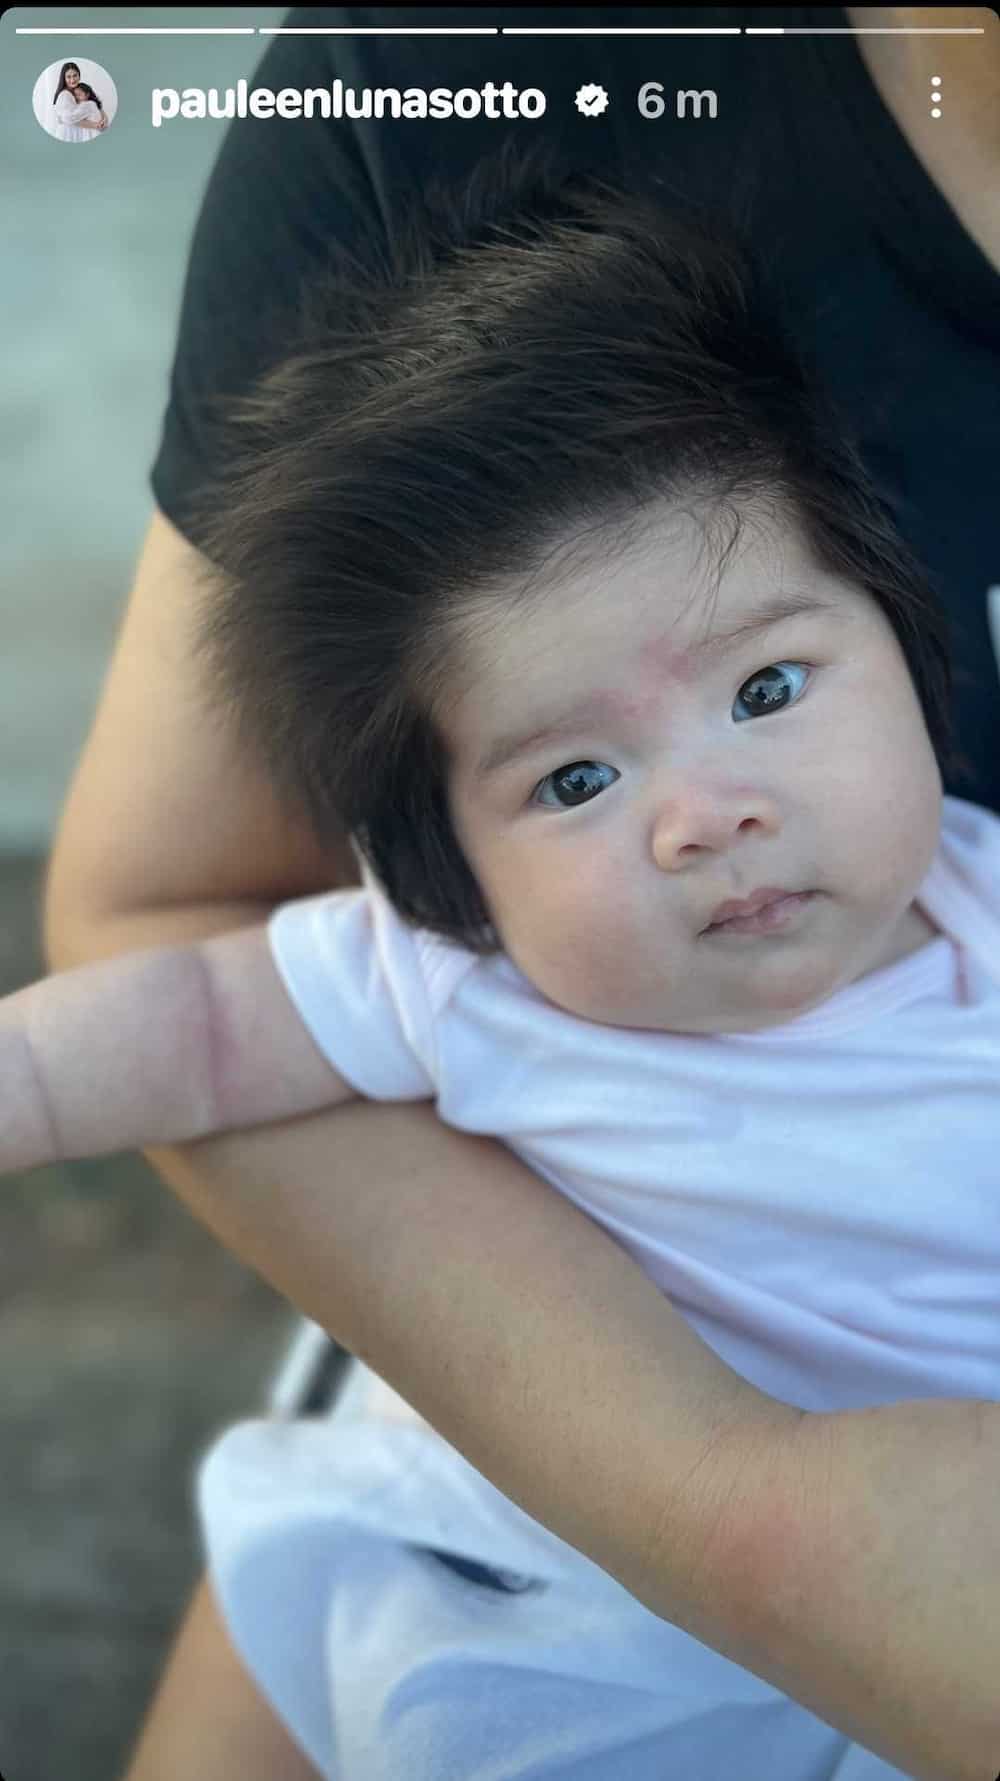 Pauleen Luna shares new adorable snaps of her, Tali, Mochi Sotto